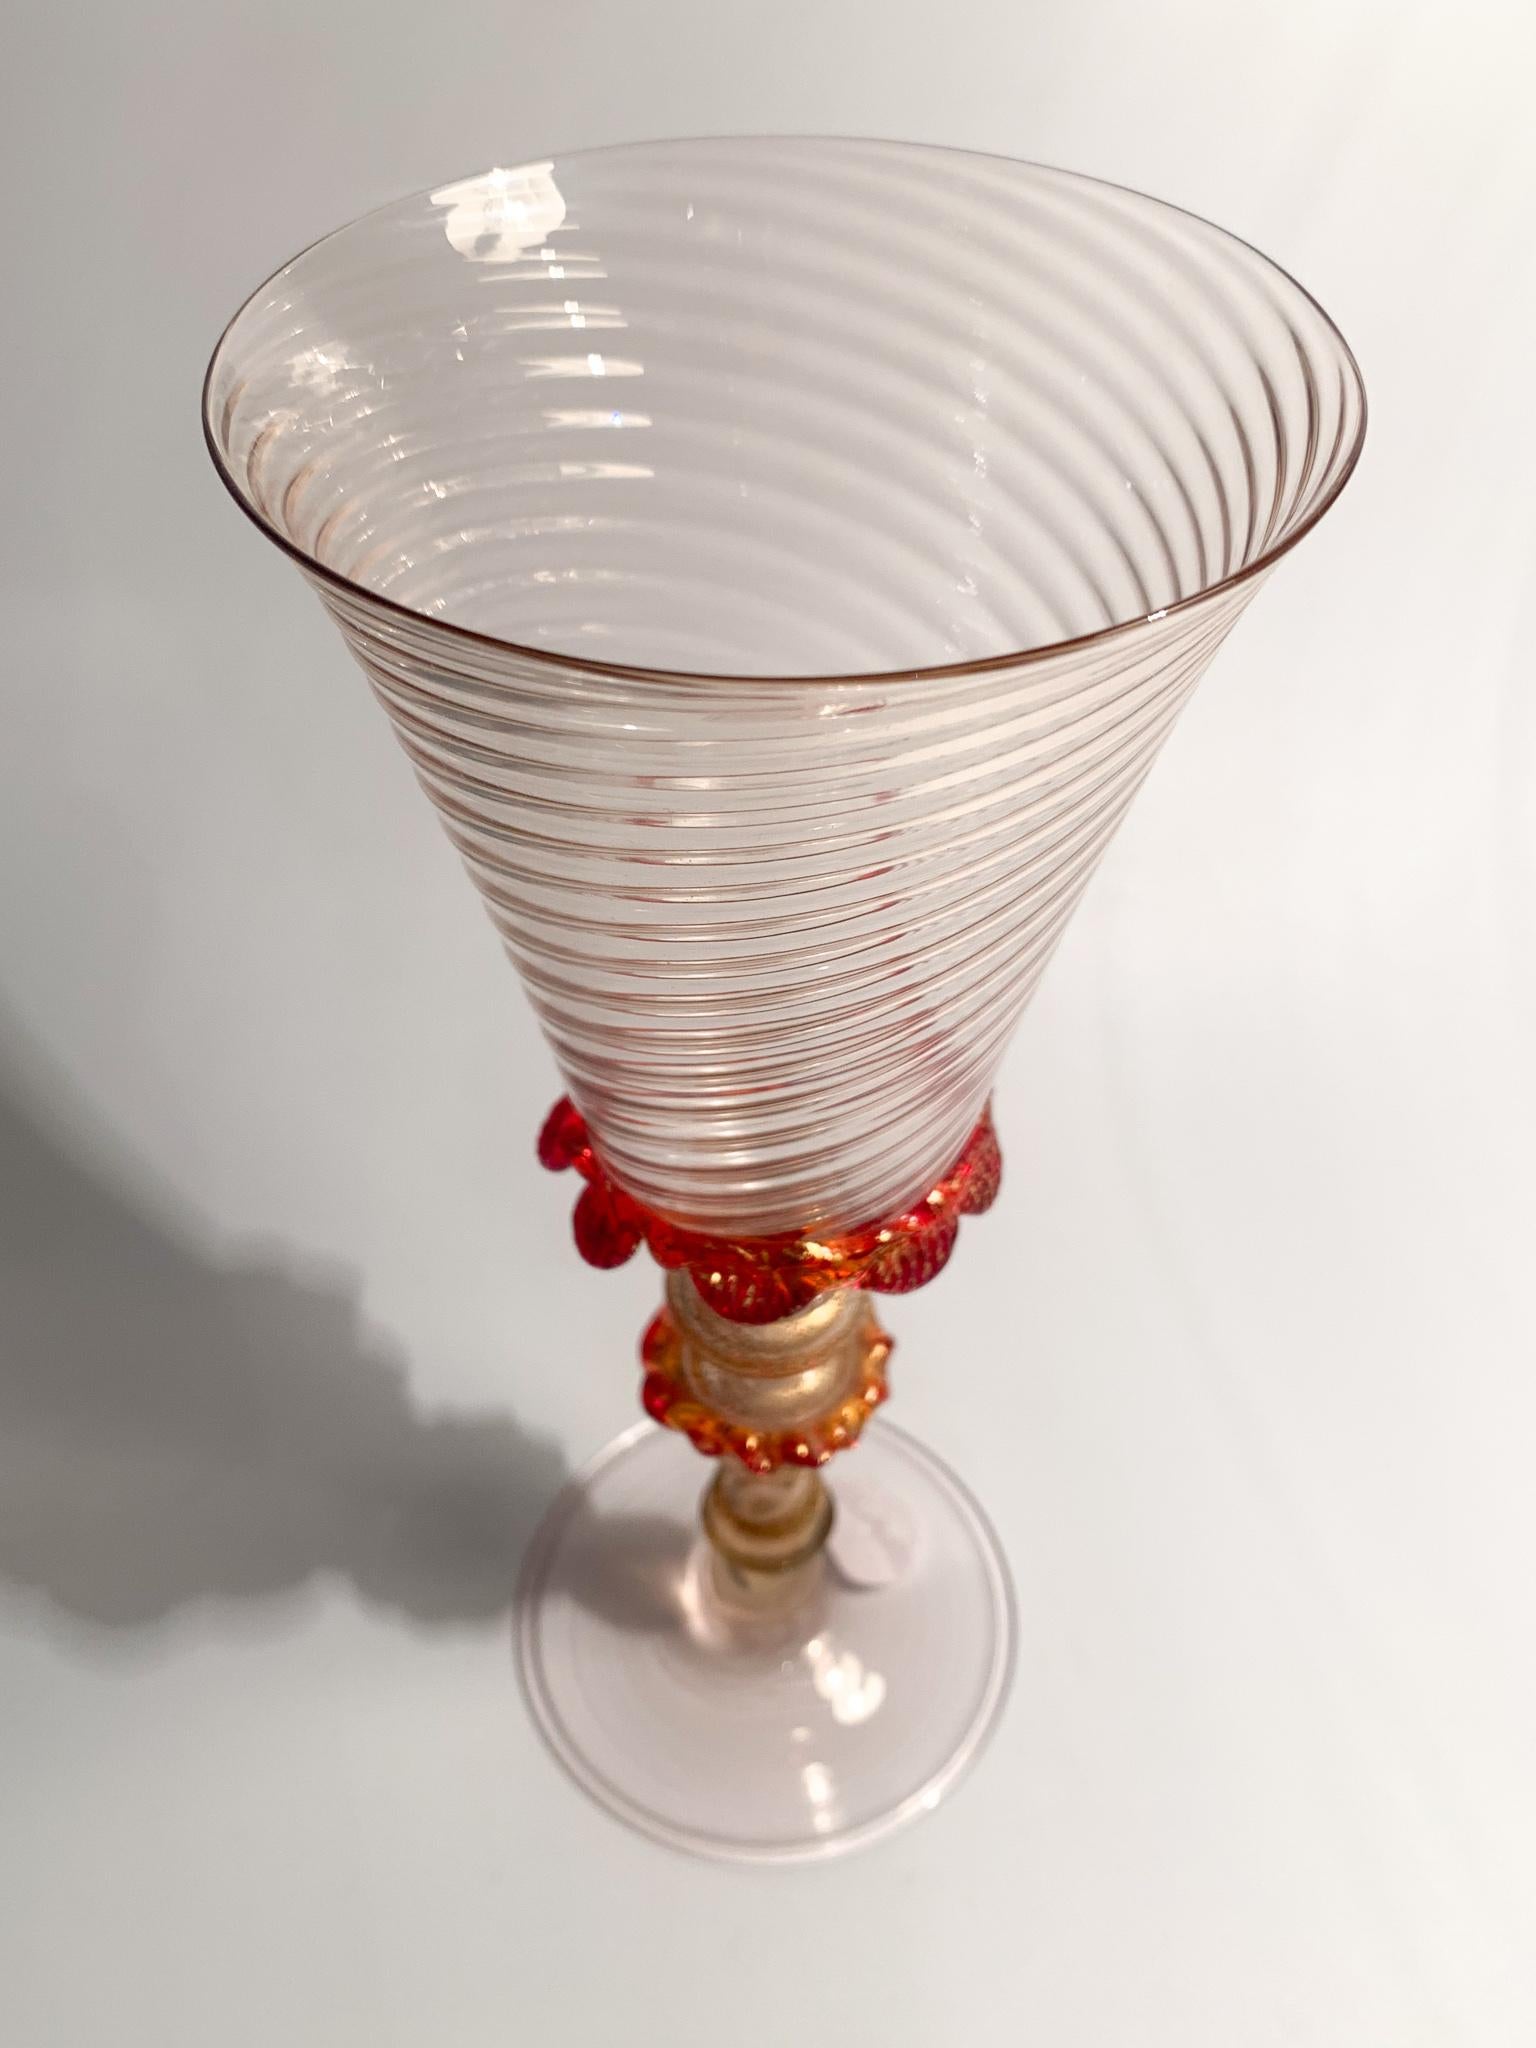 Mid-Century Modern Italian Glass in Pink and Red Gold Leaf Murano Glass from the 1950s